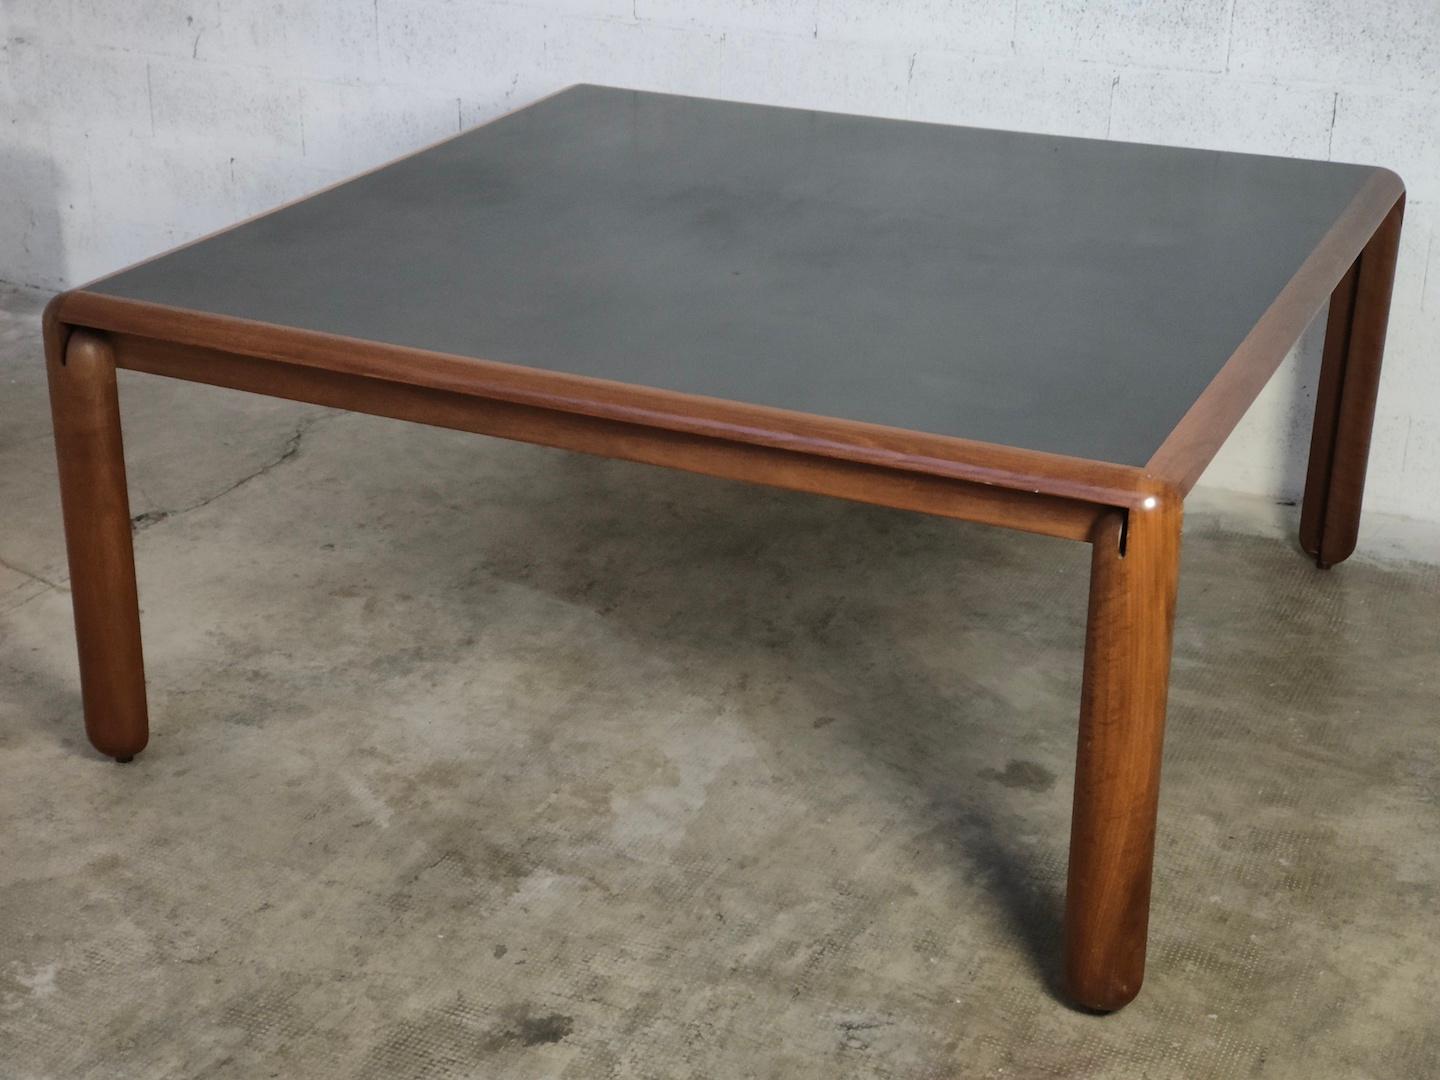 Square Walnut Table Model 781 by Vico Magistretti for Cassina, 60s , 70s For Sale 2